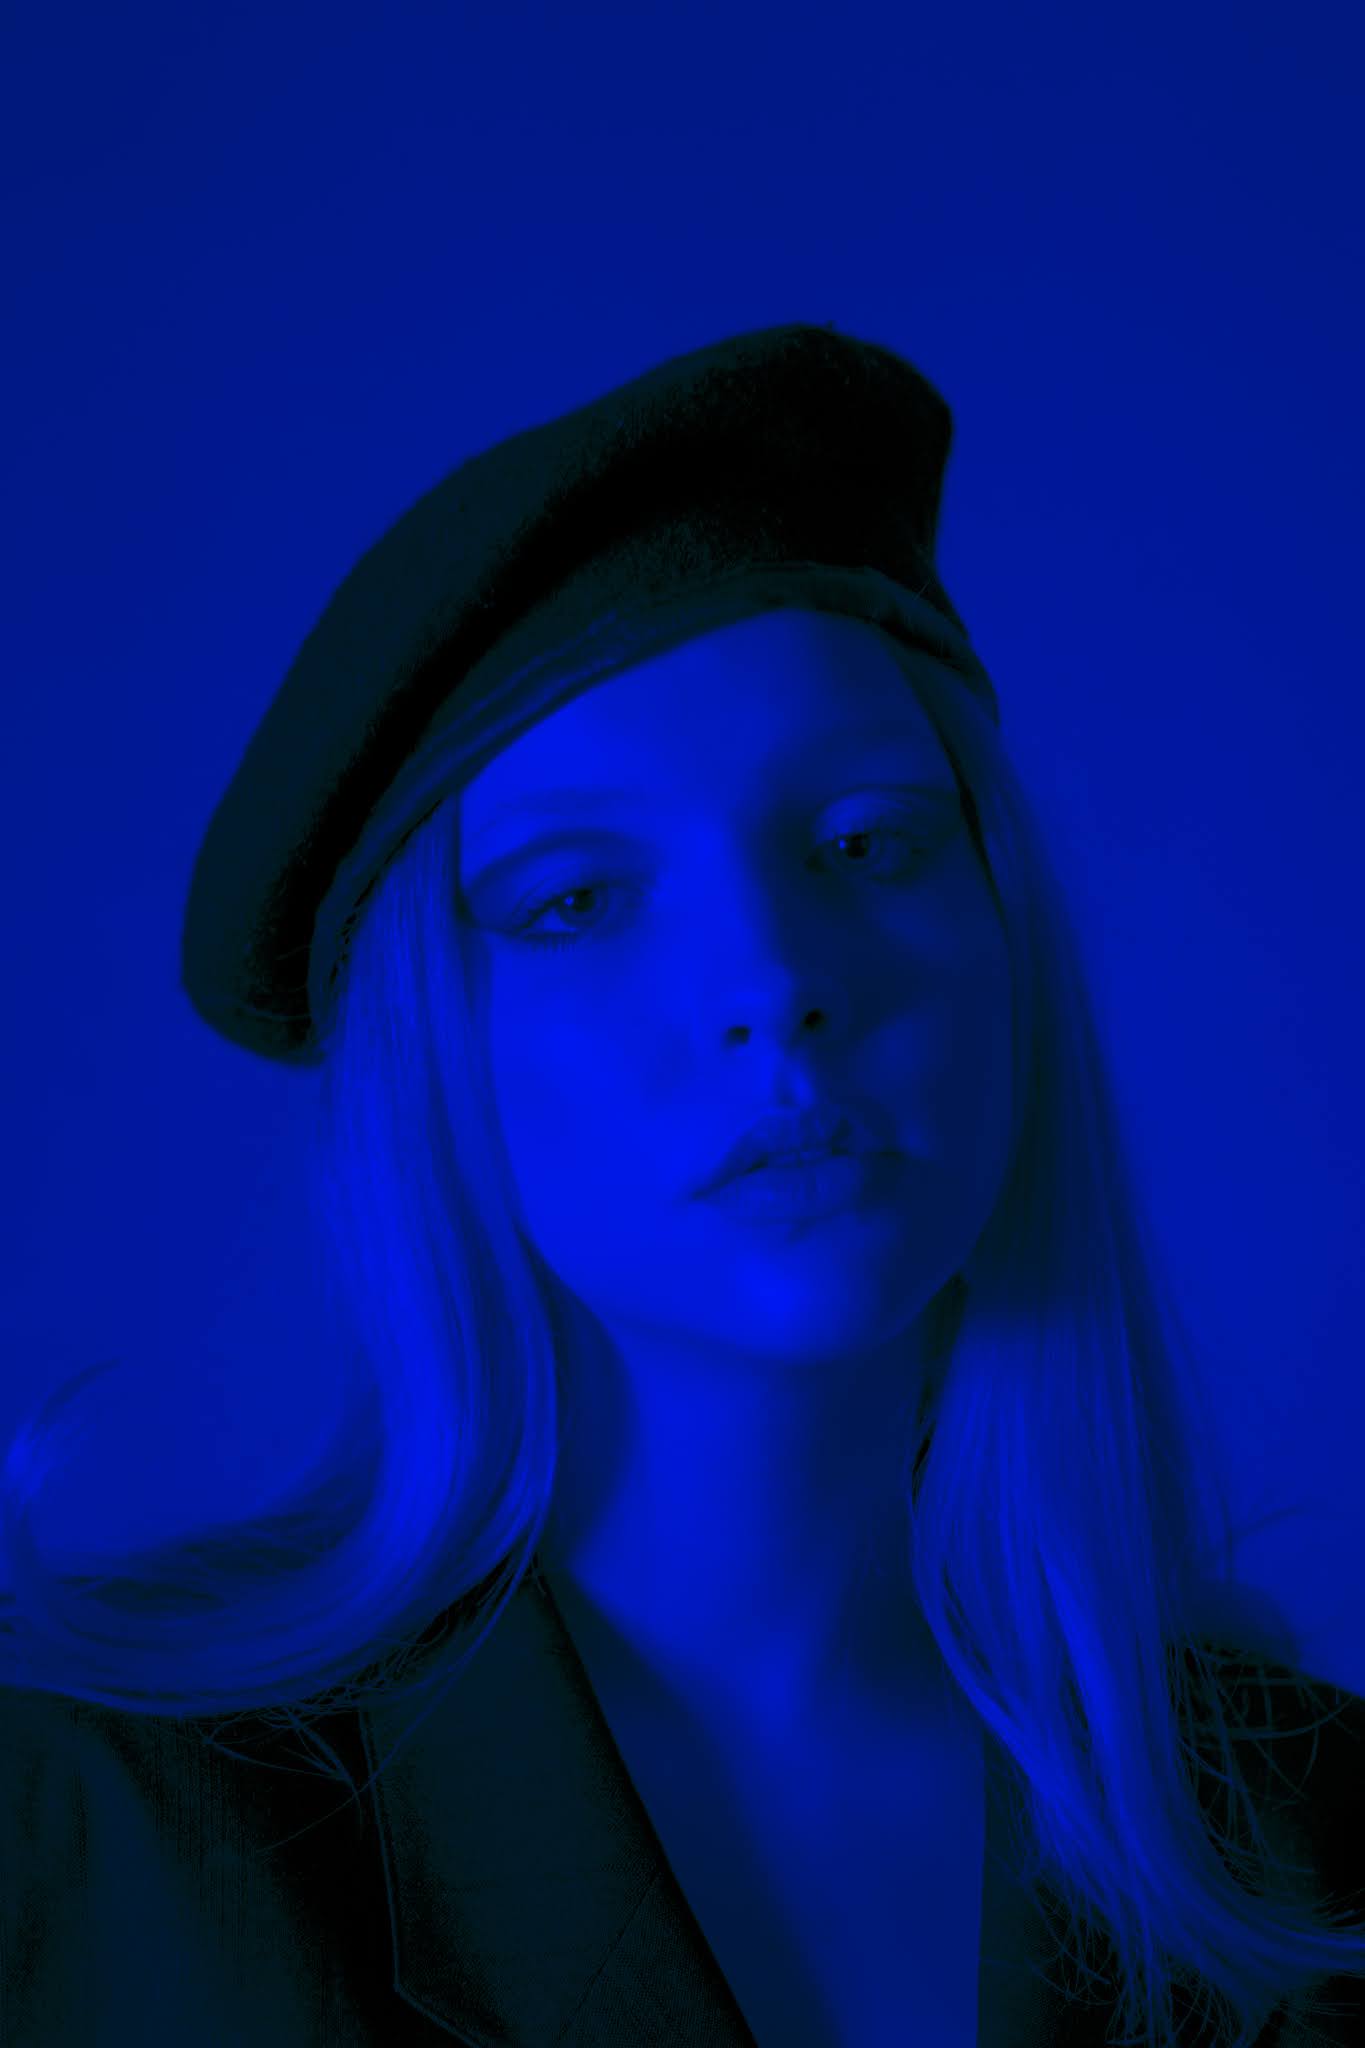 Test shoot with Helena from Sonic Models. Styling, photography by Donovan Pavleković, make up by Ivana Lončar. Blond girl in retro outfits.